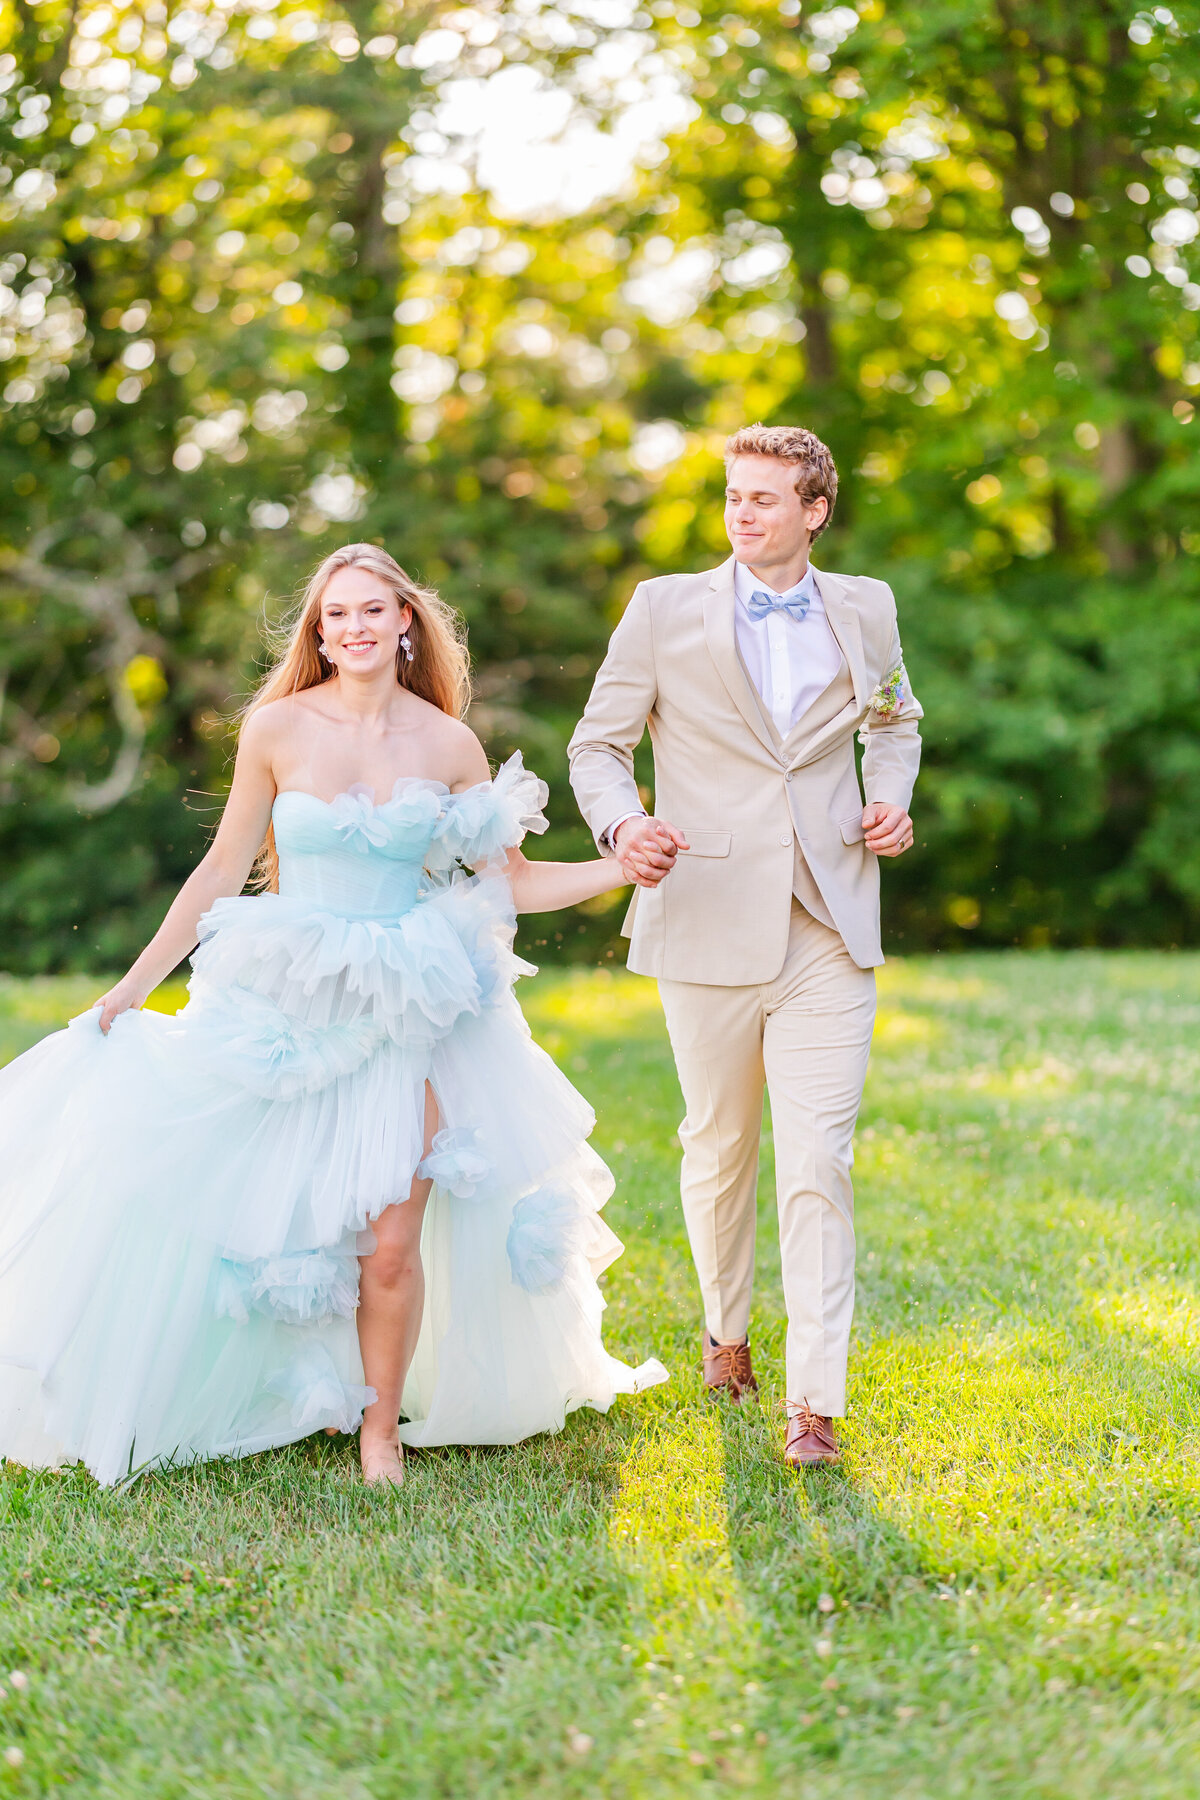 groom in brown suite with bow tie and bride with blue chiffon dress running holding hands